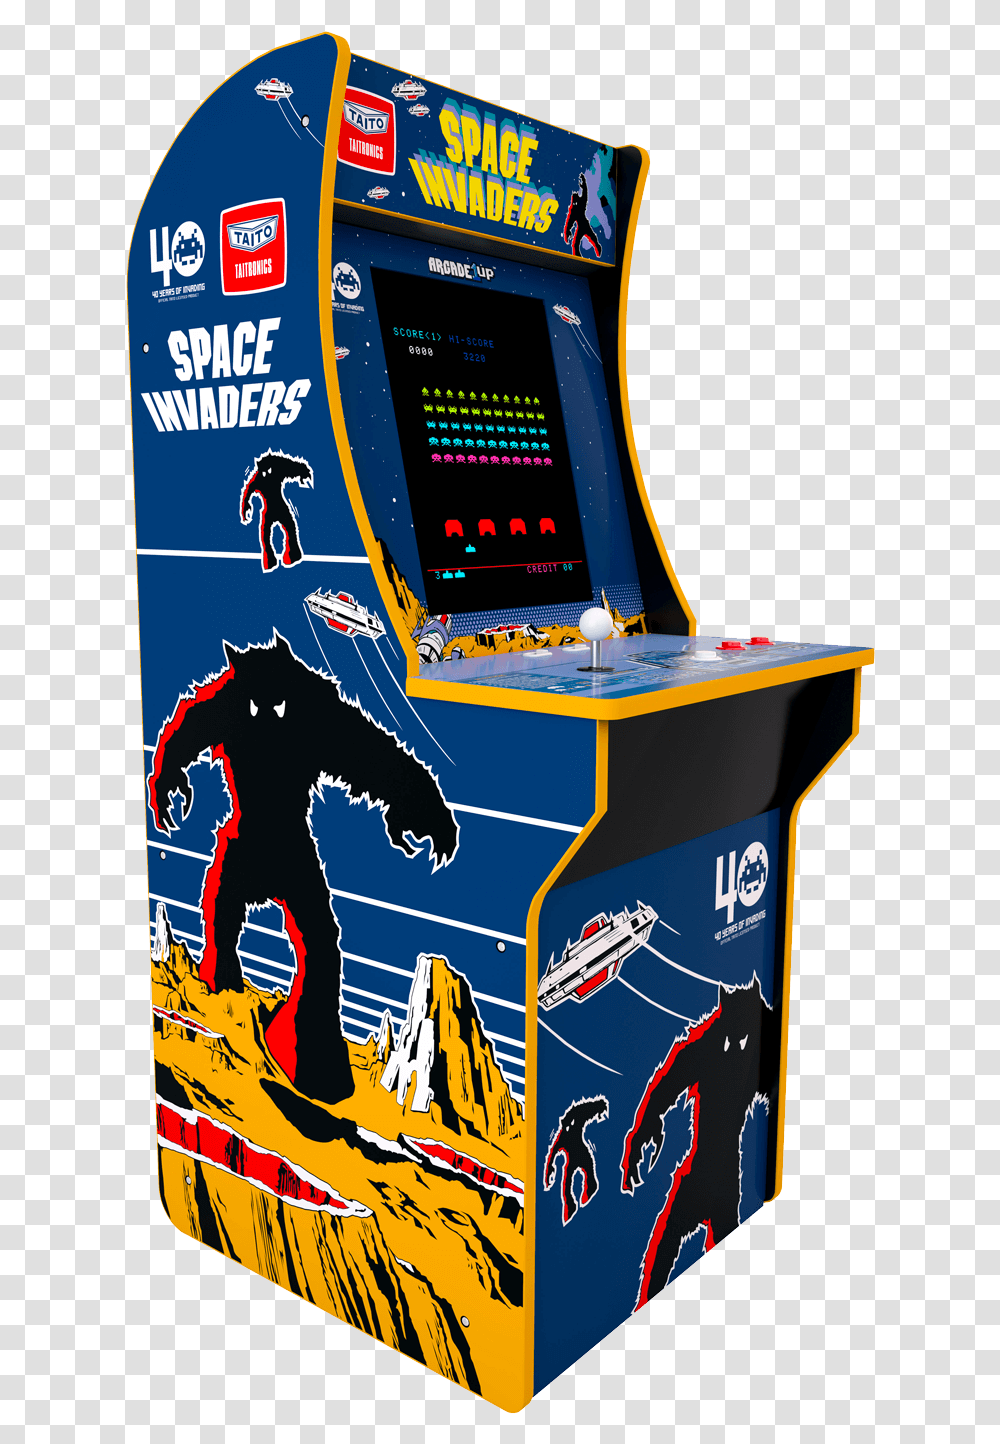 Space Invaders Arcade CabinetClass Lazyload Lazyload 1up Arcade Space Invaders, Arcade Game Machine, Person, Human, Poster Transparent Png